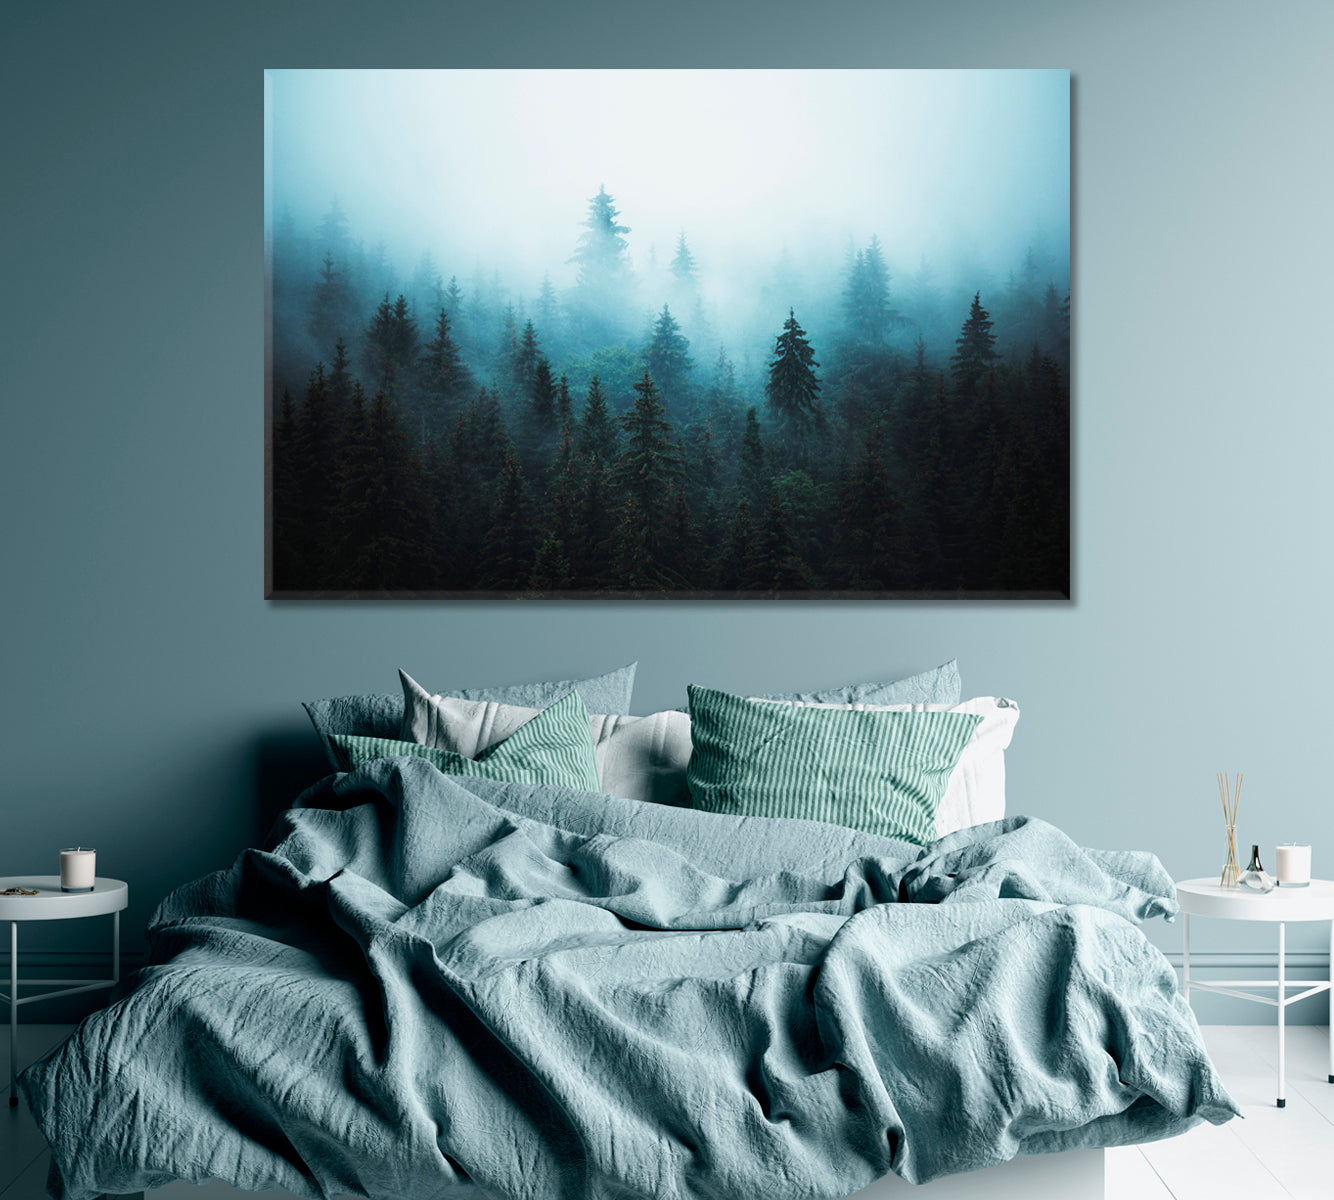 Misty Spruce Forest Canvas Print ArtLexy 1 Panel 24"x16" inches 